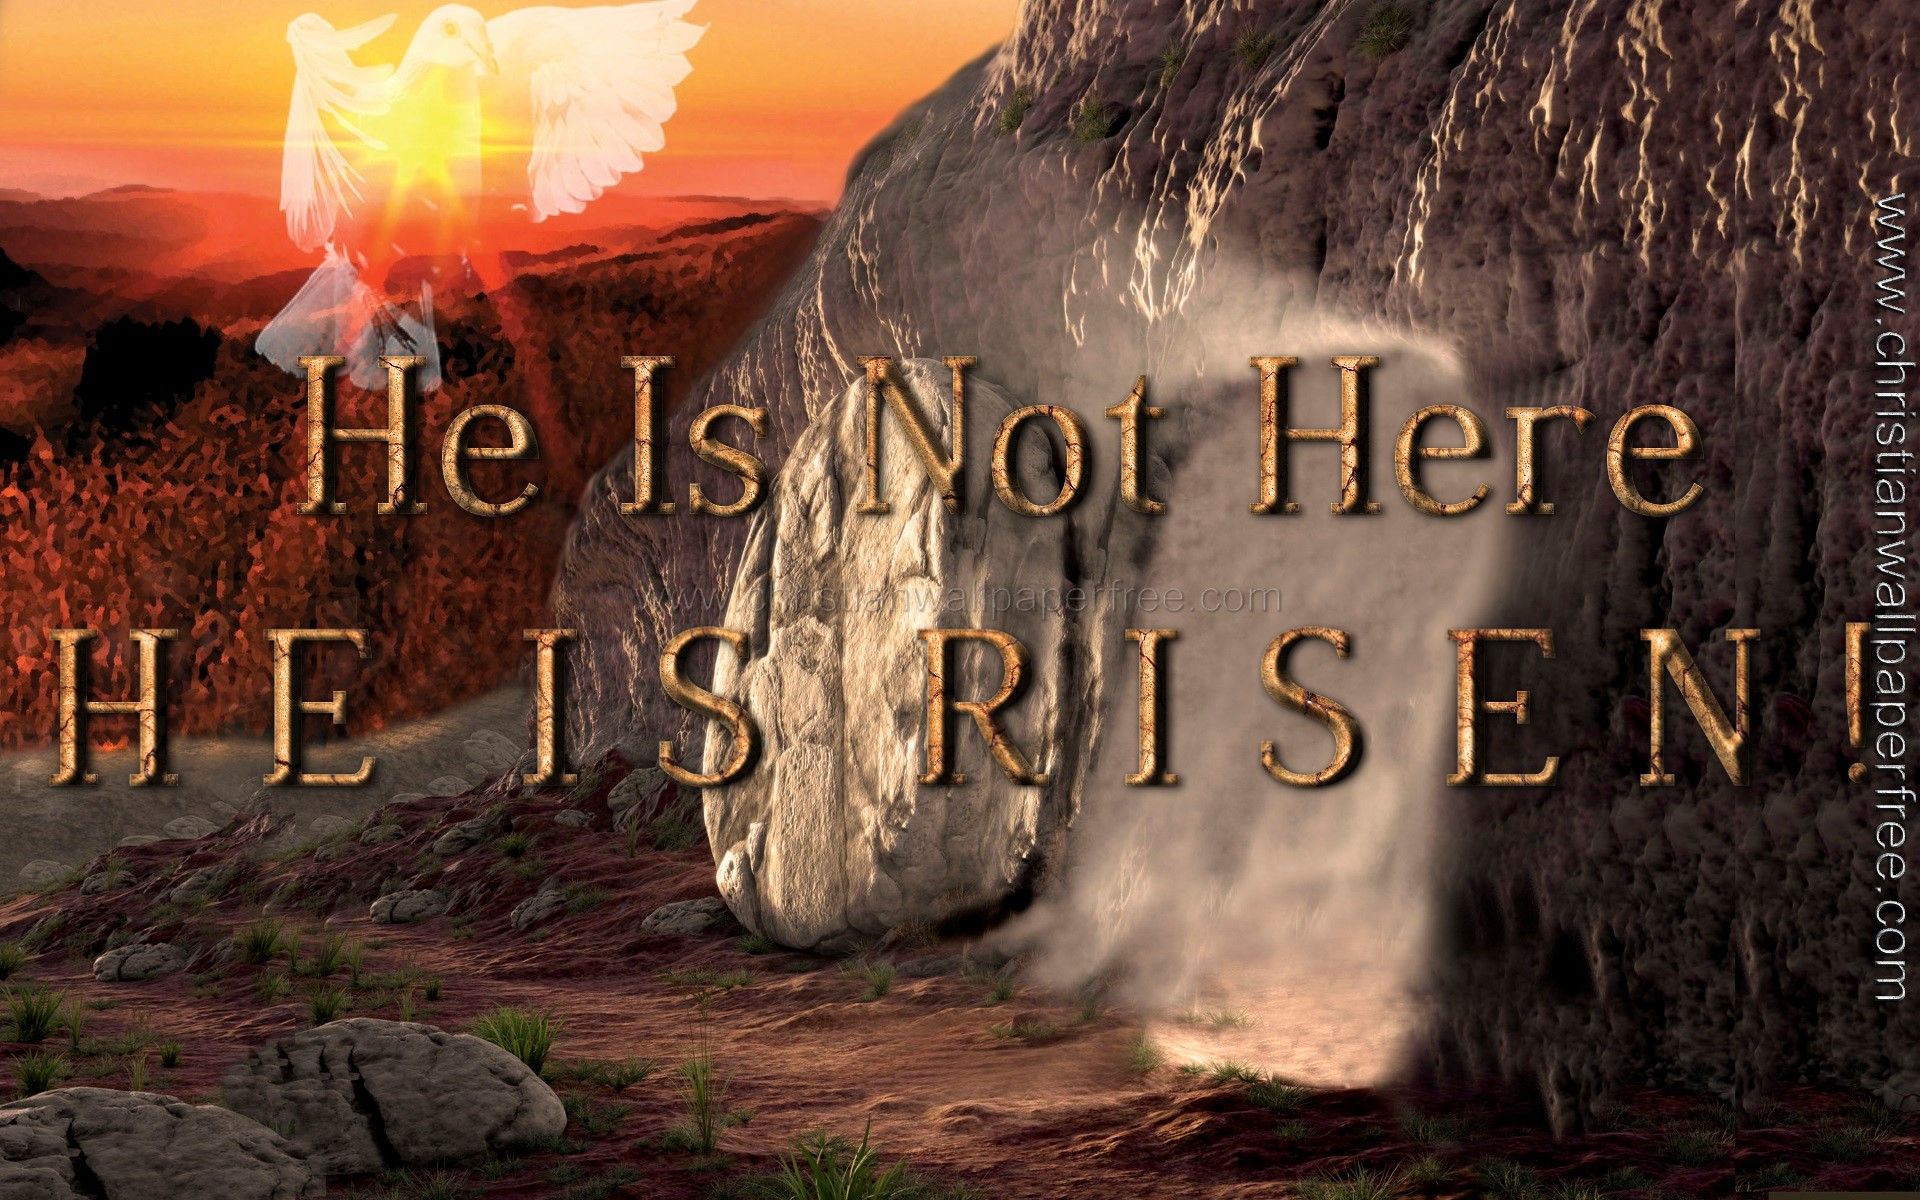 He is not here